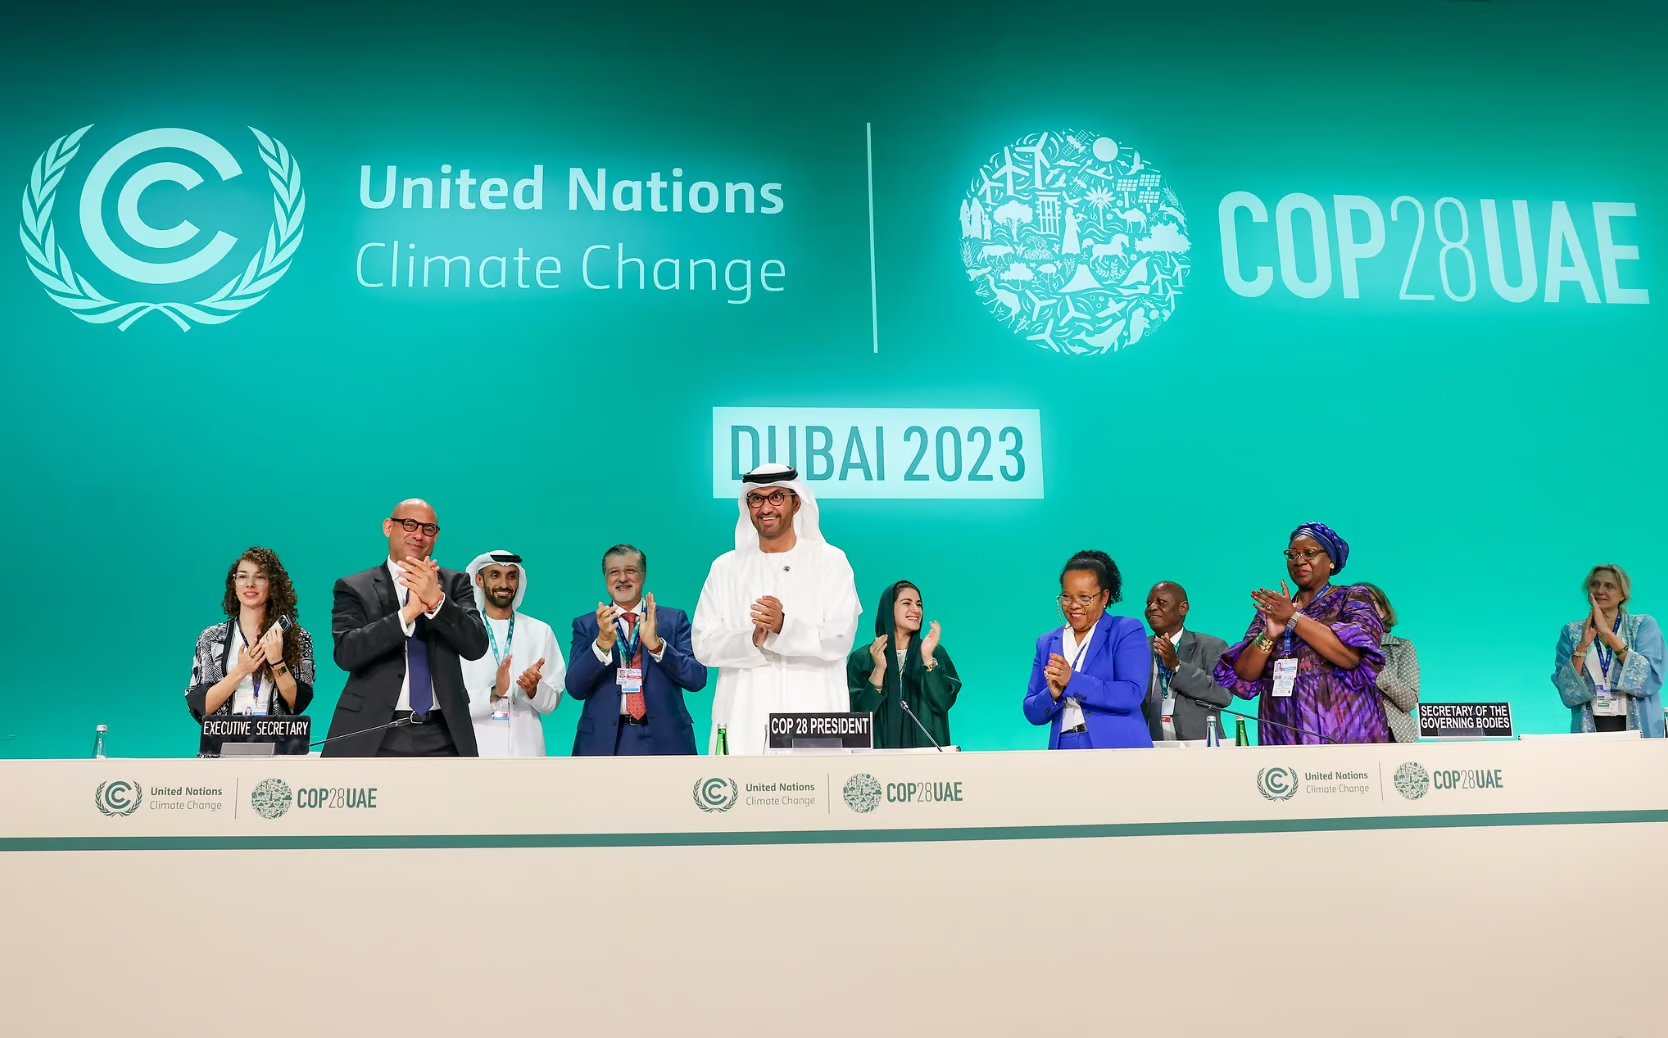 Cop28 Climate Change Conference - Environmental Summit